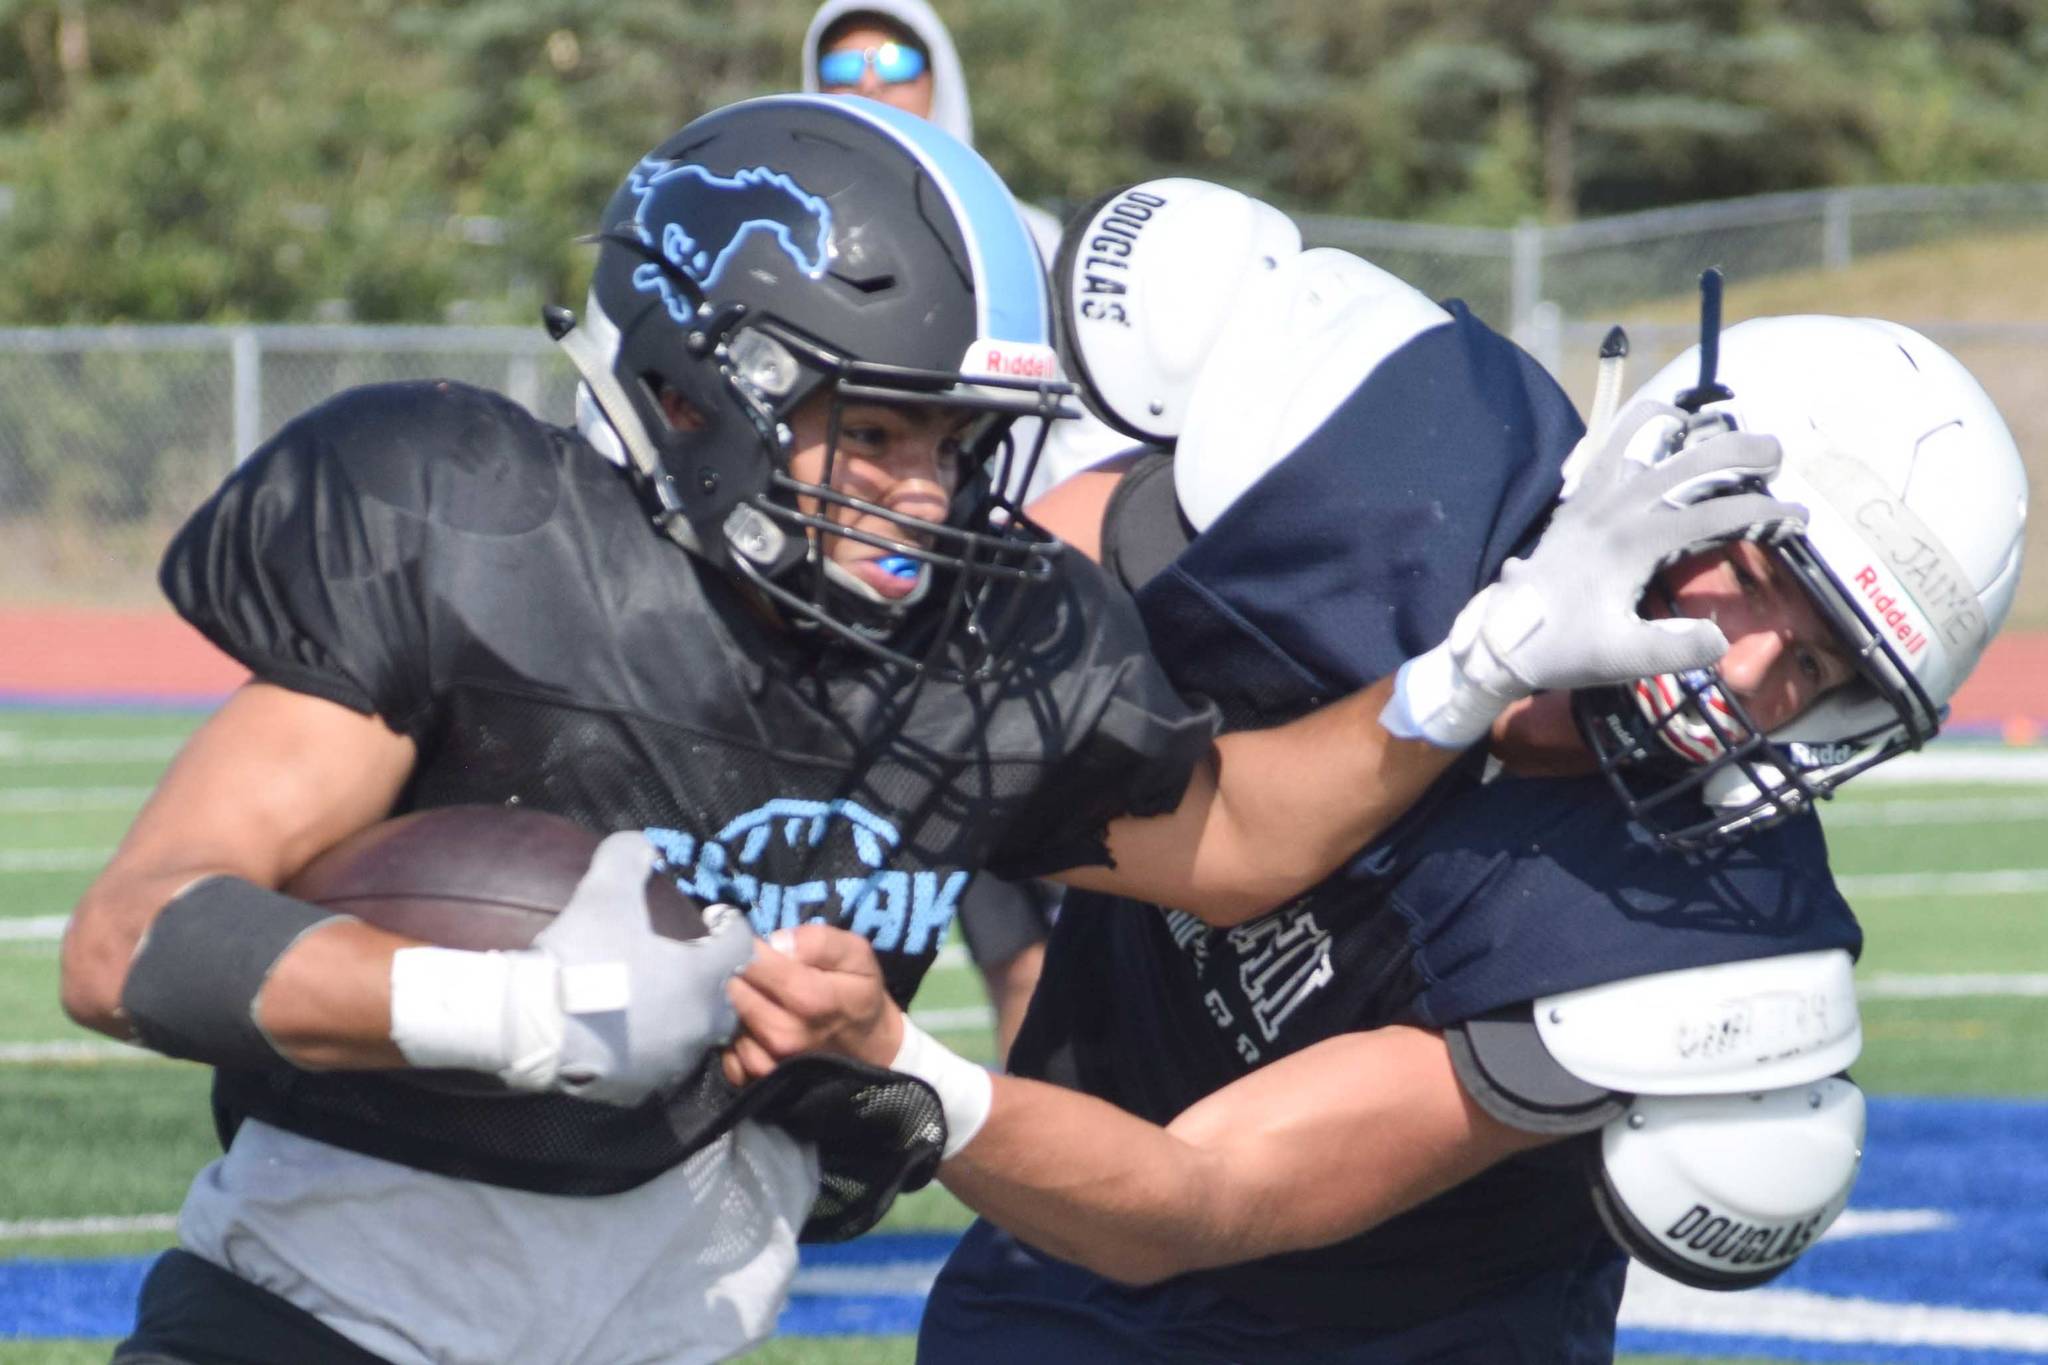 Chugiak’s Tyler Huffer stiff-arms Soldotna’s Hudson Metcalf during a scrimmage Saturday, Aug. 10, 2019, at Justin Maile Field in Soldotna, Alaska. (Photo by Jeff Helminiak/Peninsula Clarion)